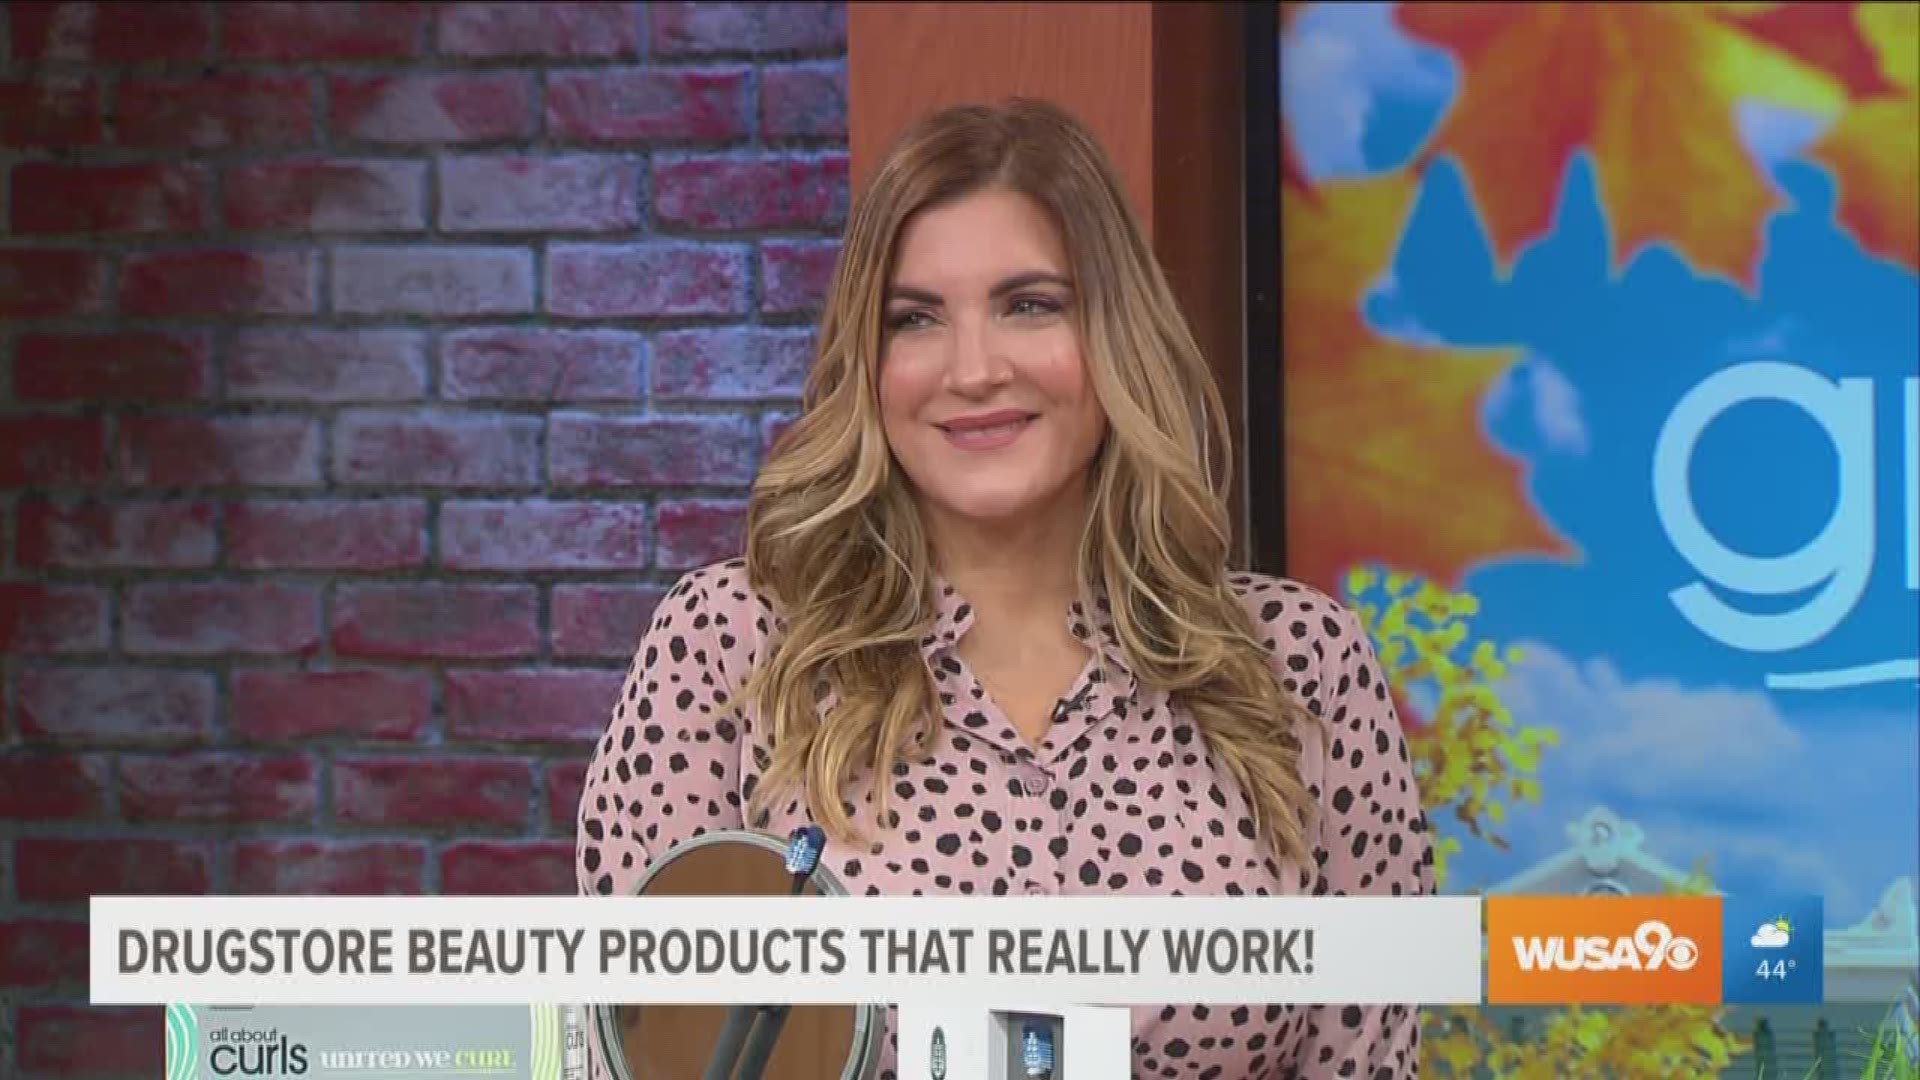 Elena Duque, beauty, lifestyle & travel expert talks about a few drugstore beauty products that get the job done!